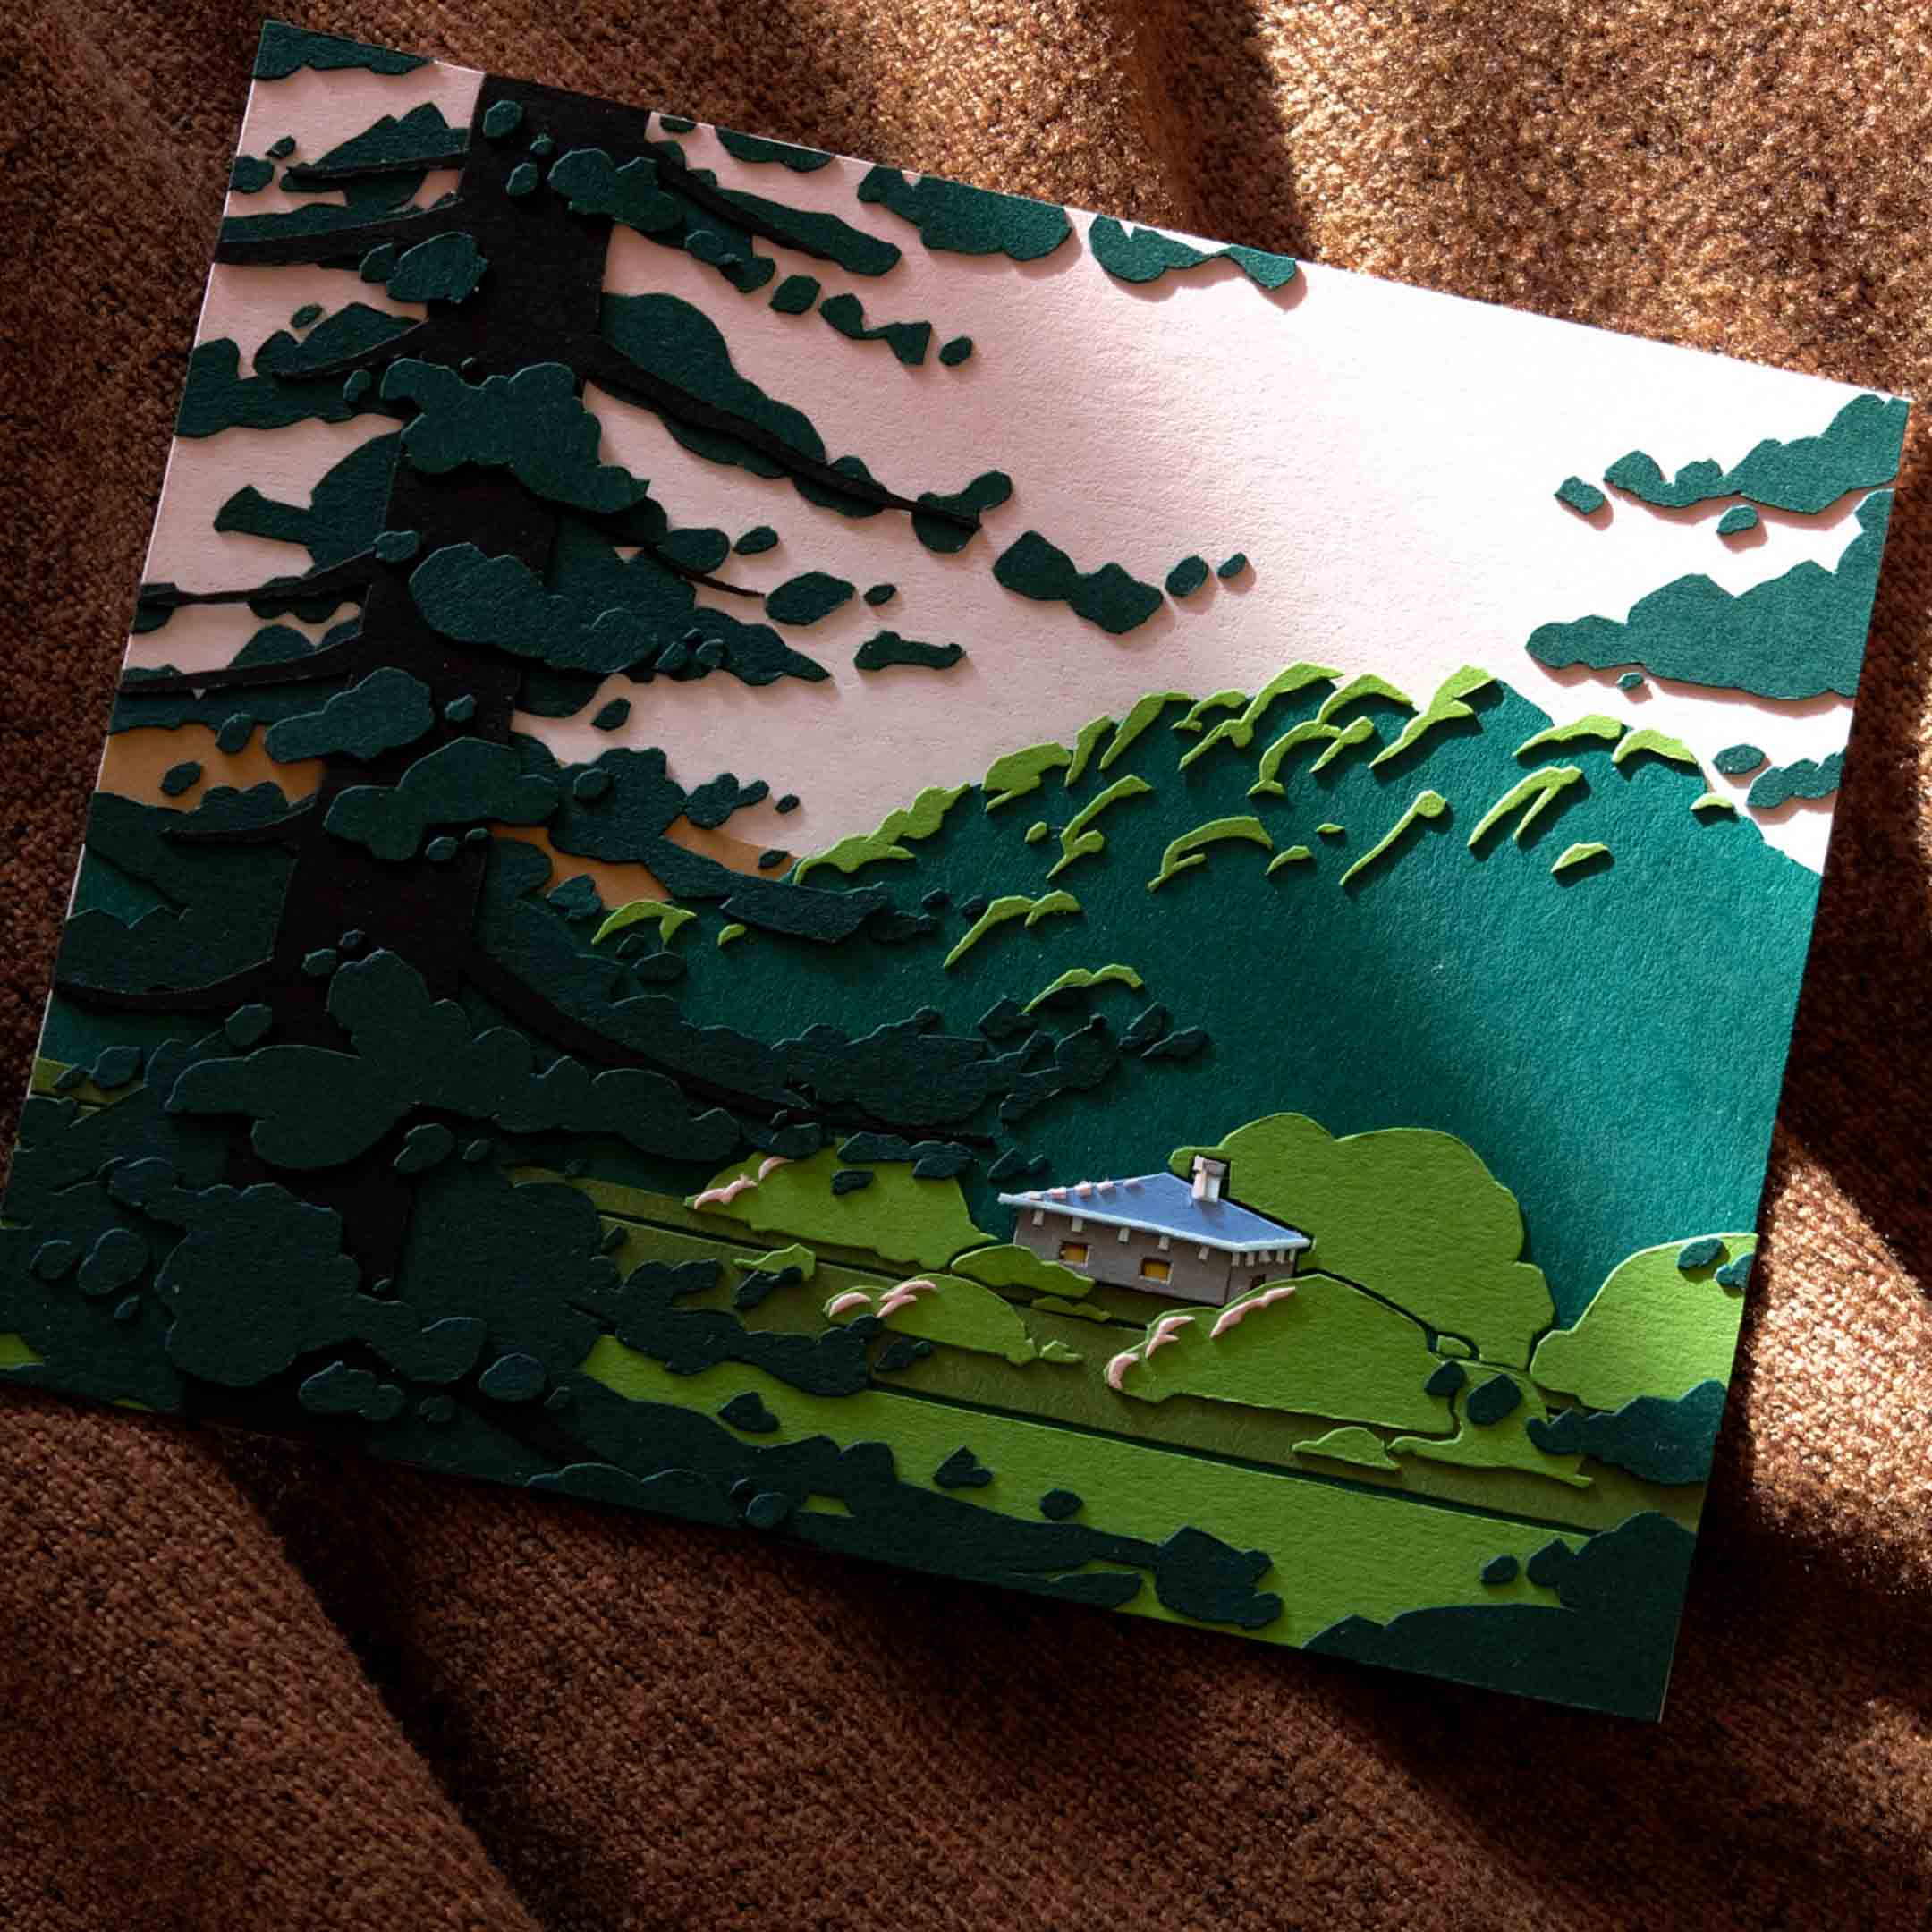 A little gray paper house sits in a green paper field, peeking between paper trees during sunset. The artwork sits partially in a shaft of sunlight on a warm cloth background.